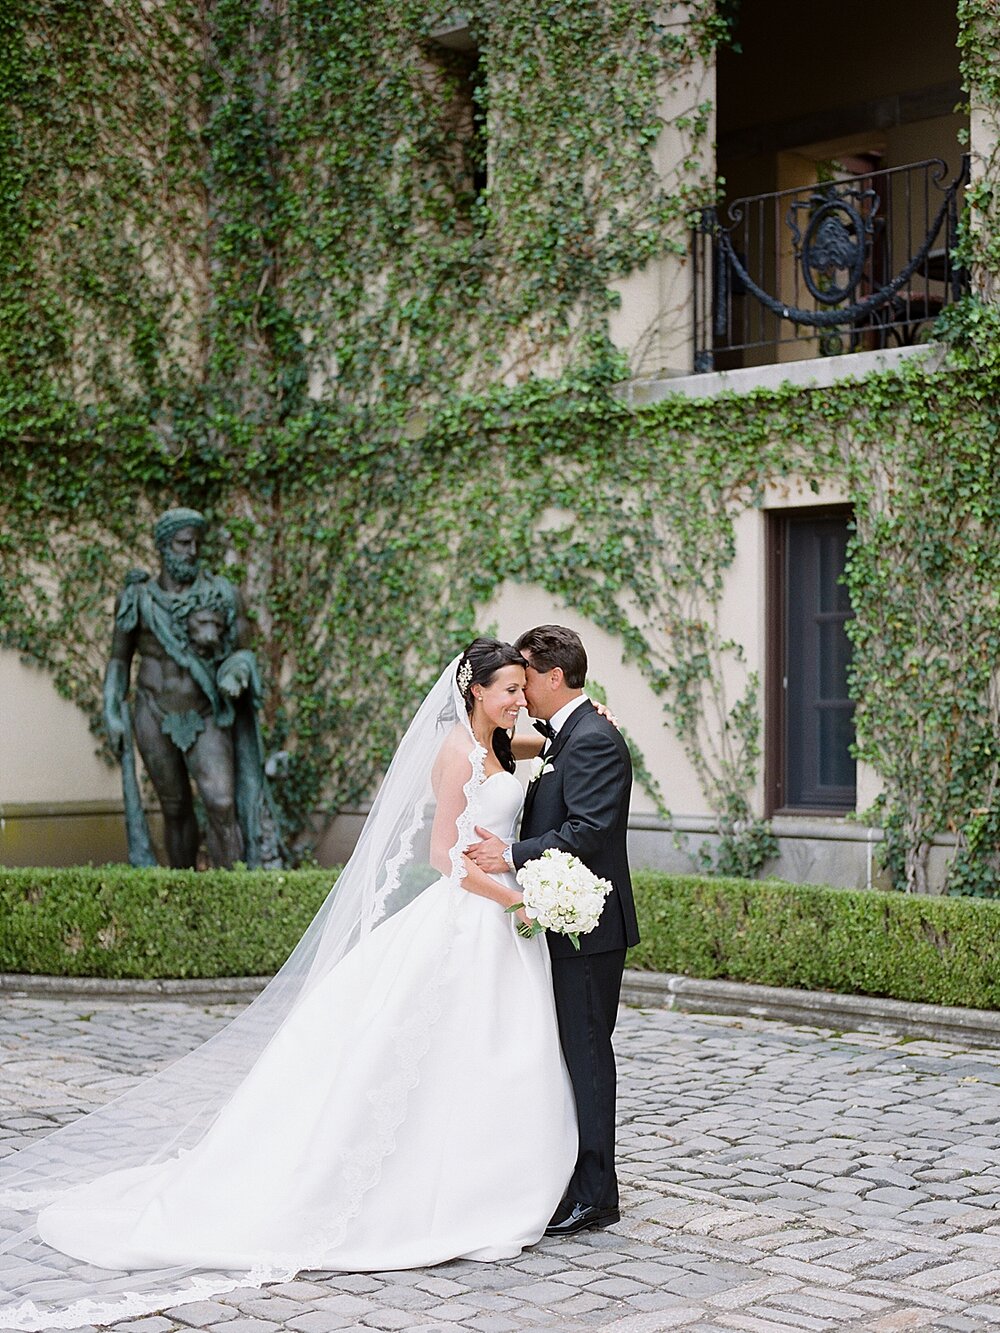 newlyweds pose by ivy covered wall at Oheka Castle | Tri-State Area Wedding Venues photographed by NY wedding photographer Asher Gardner Photography